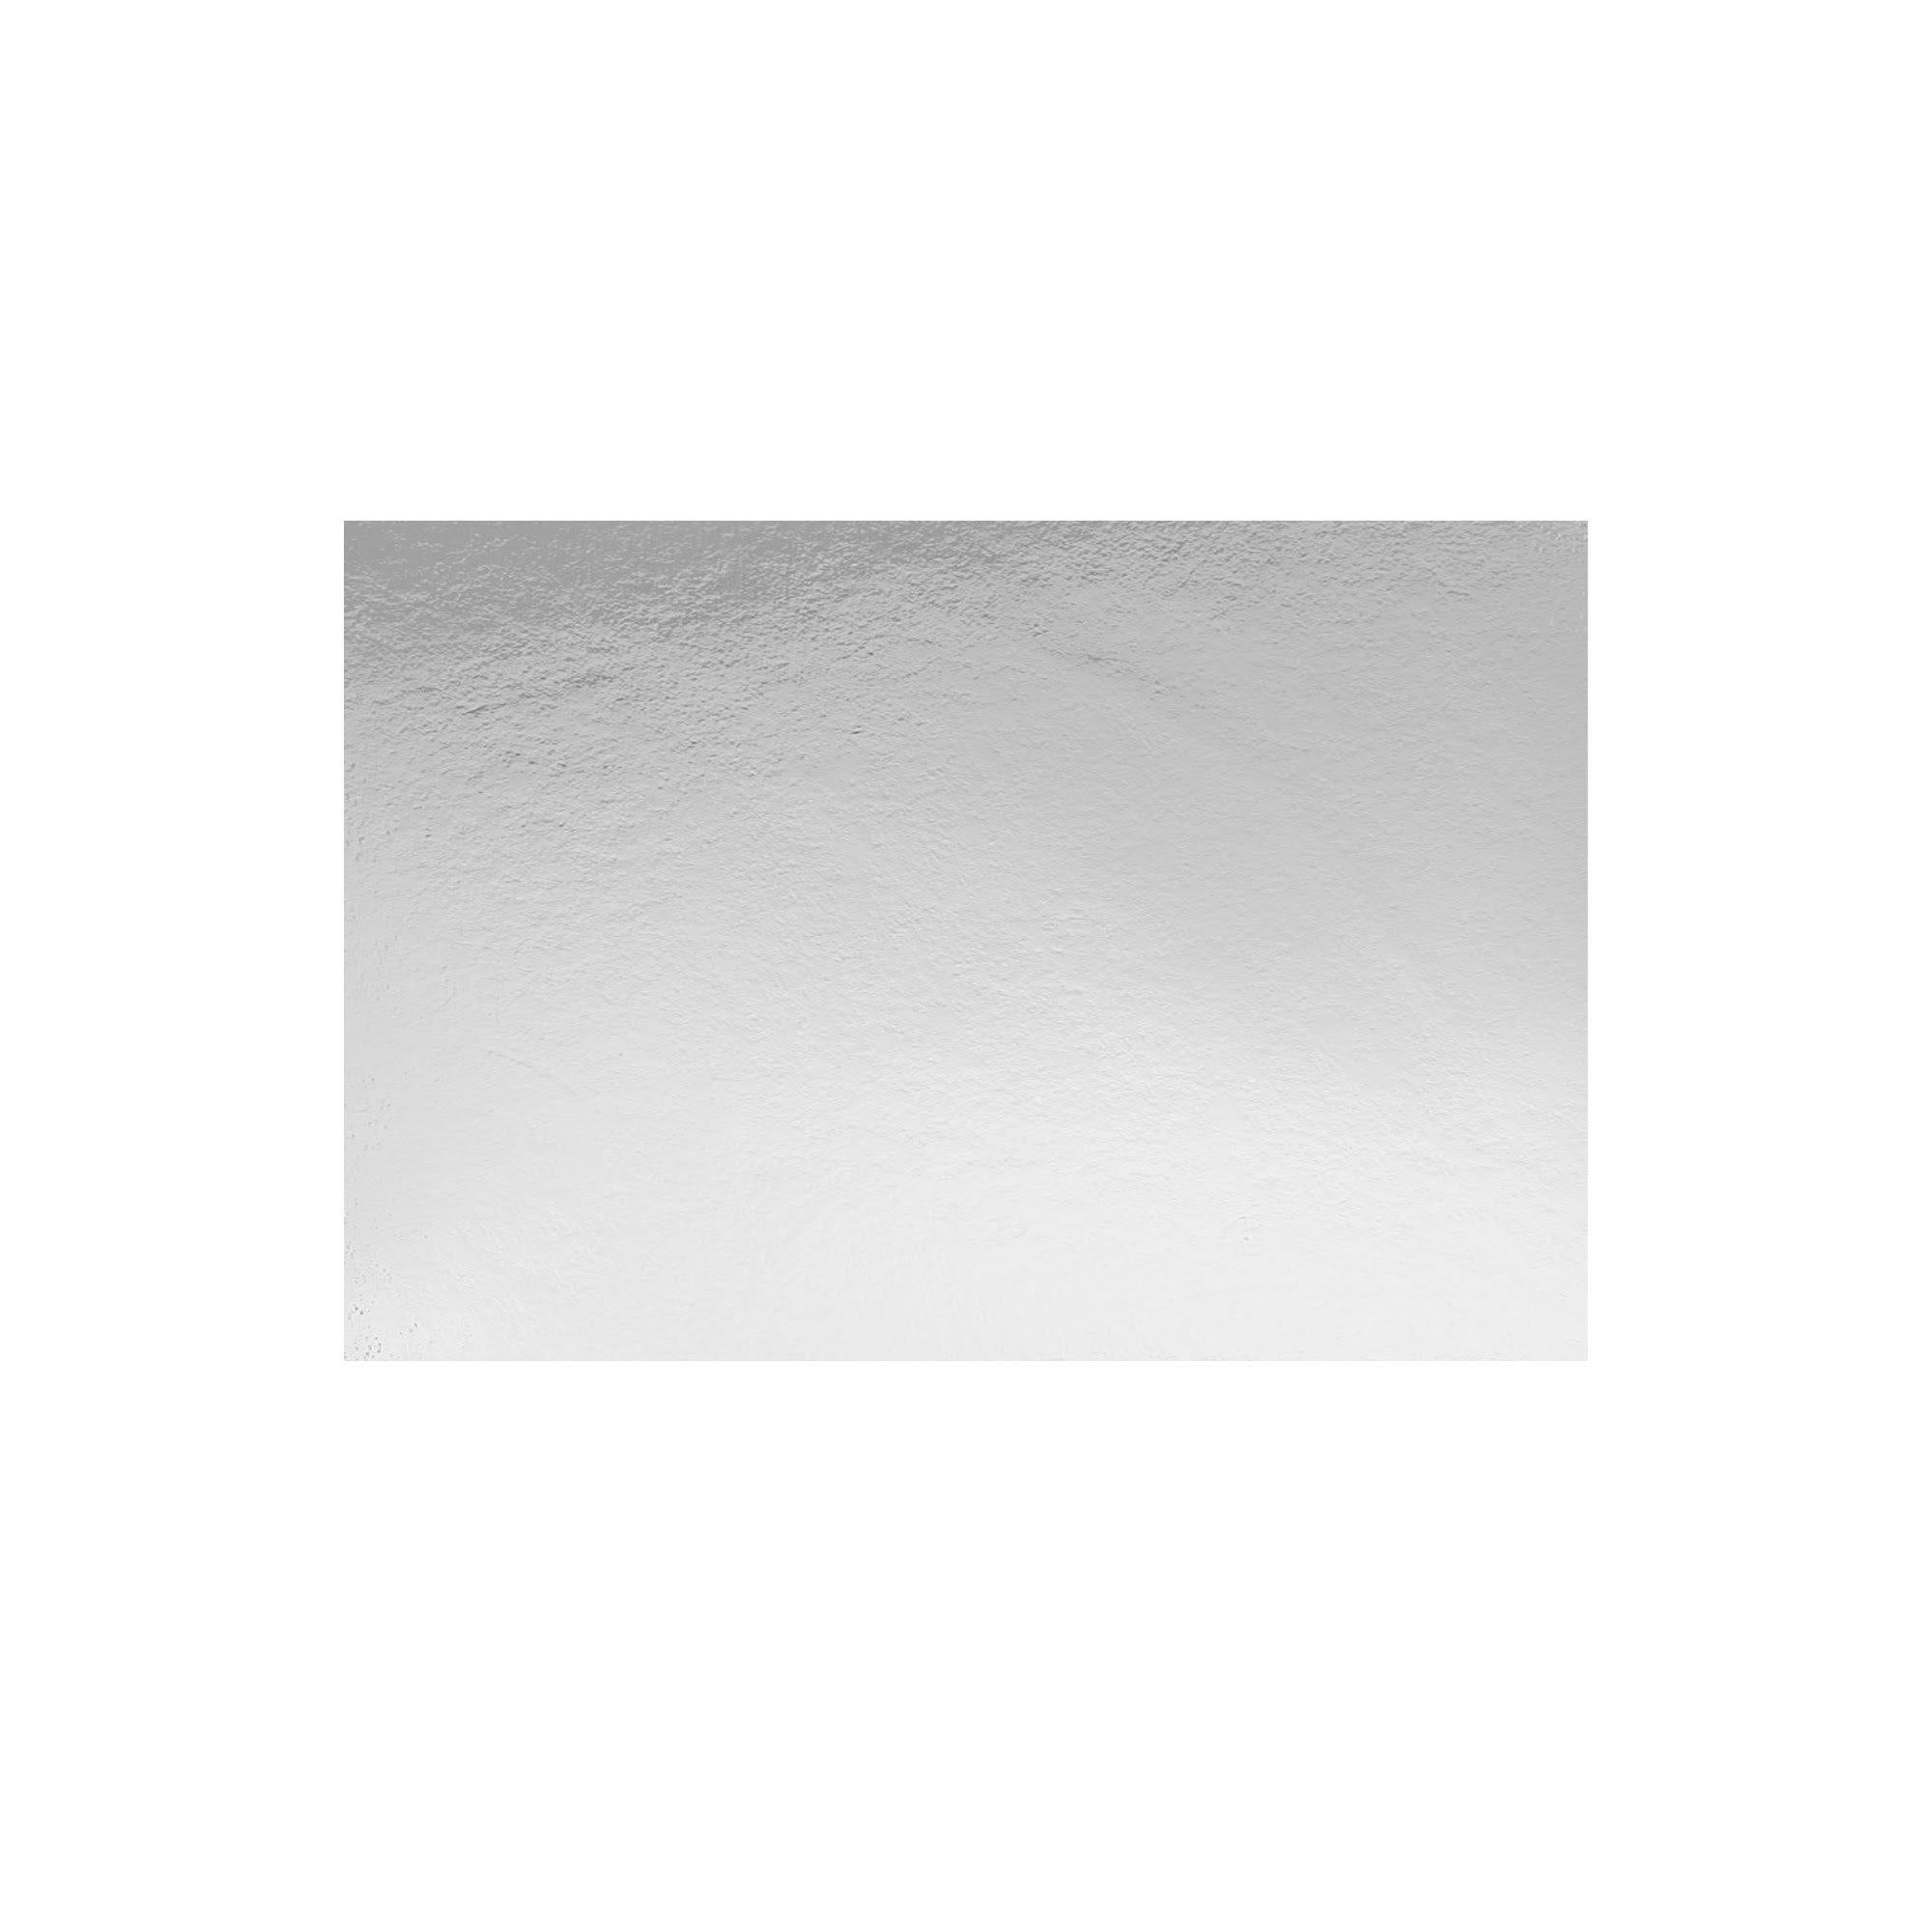 RECTANGLE 8 IN X 12 IN SILVER STANDARD BOARD - Cake Decorating Central